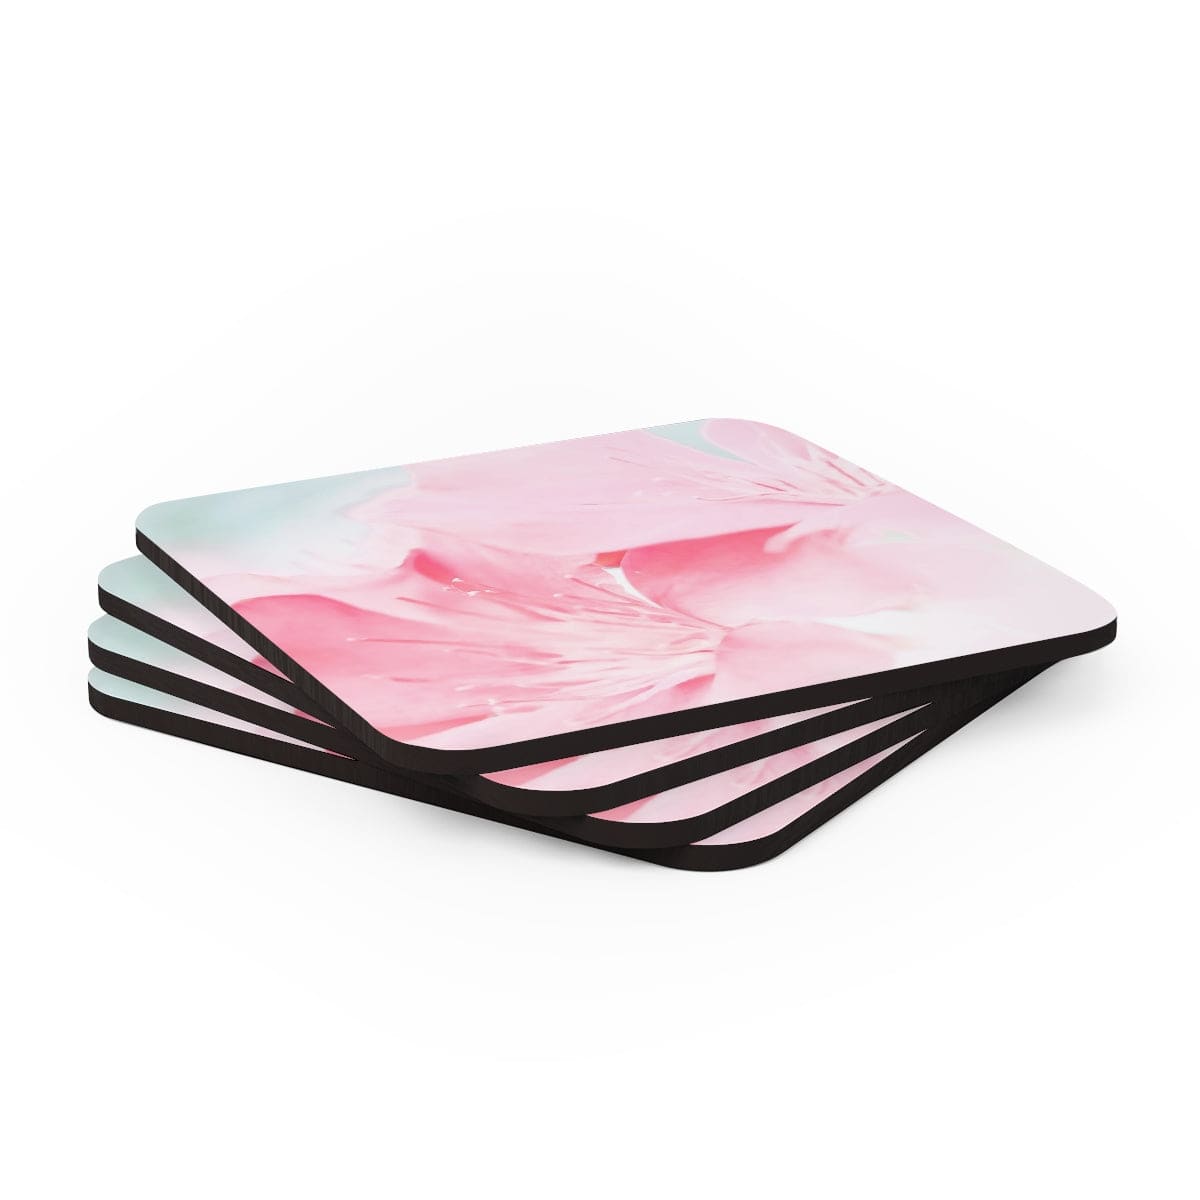 Home Decor Coaster Set - 4 Piece Home/office Pink Flower Bloom Peaceful Spring